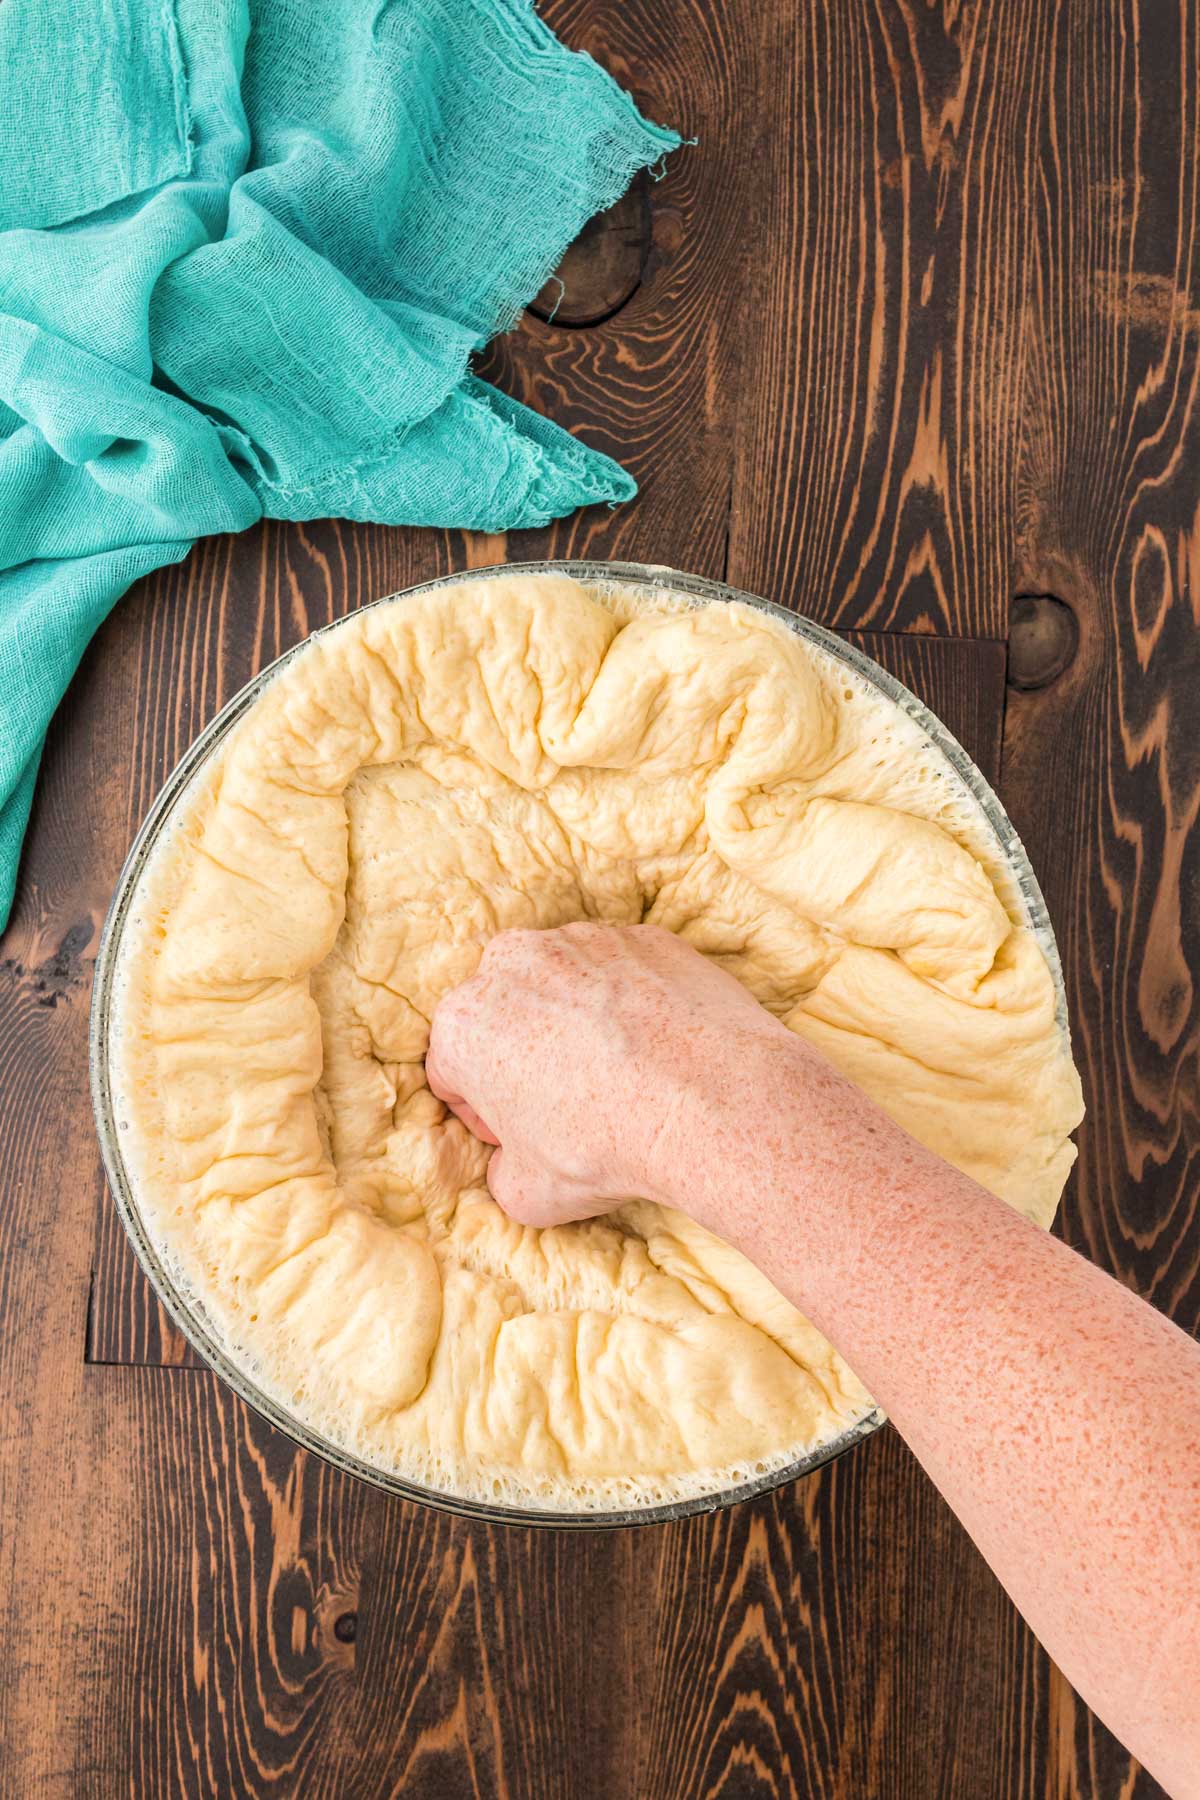 A woman's hand punch into a bowl of dough.